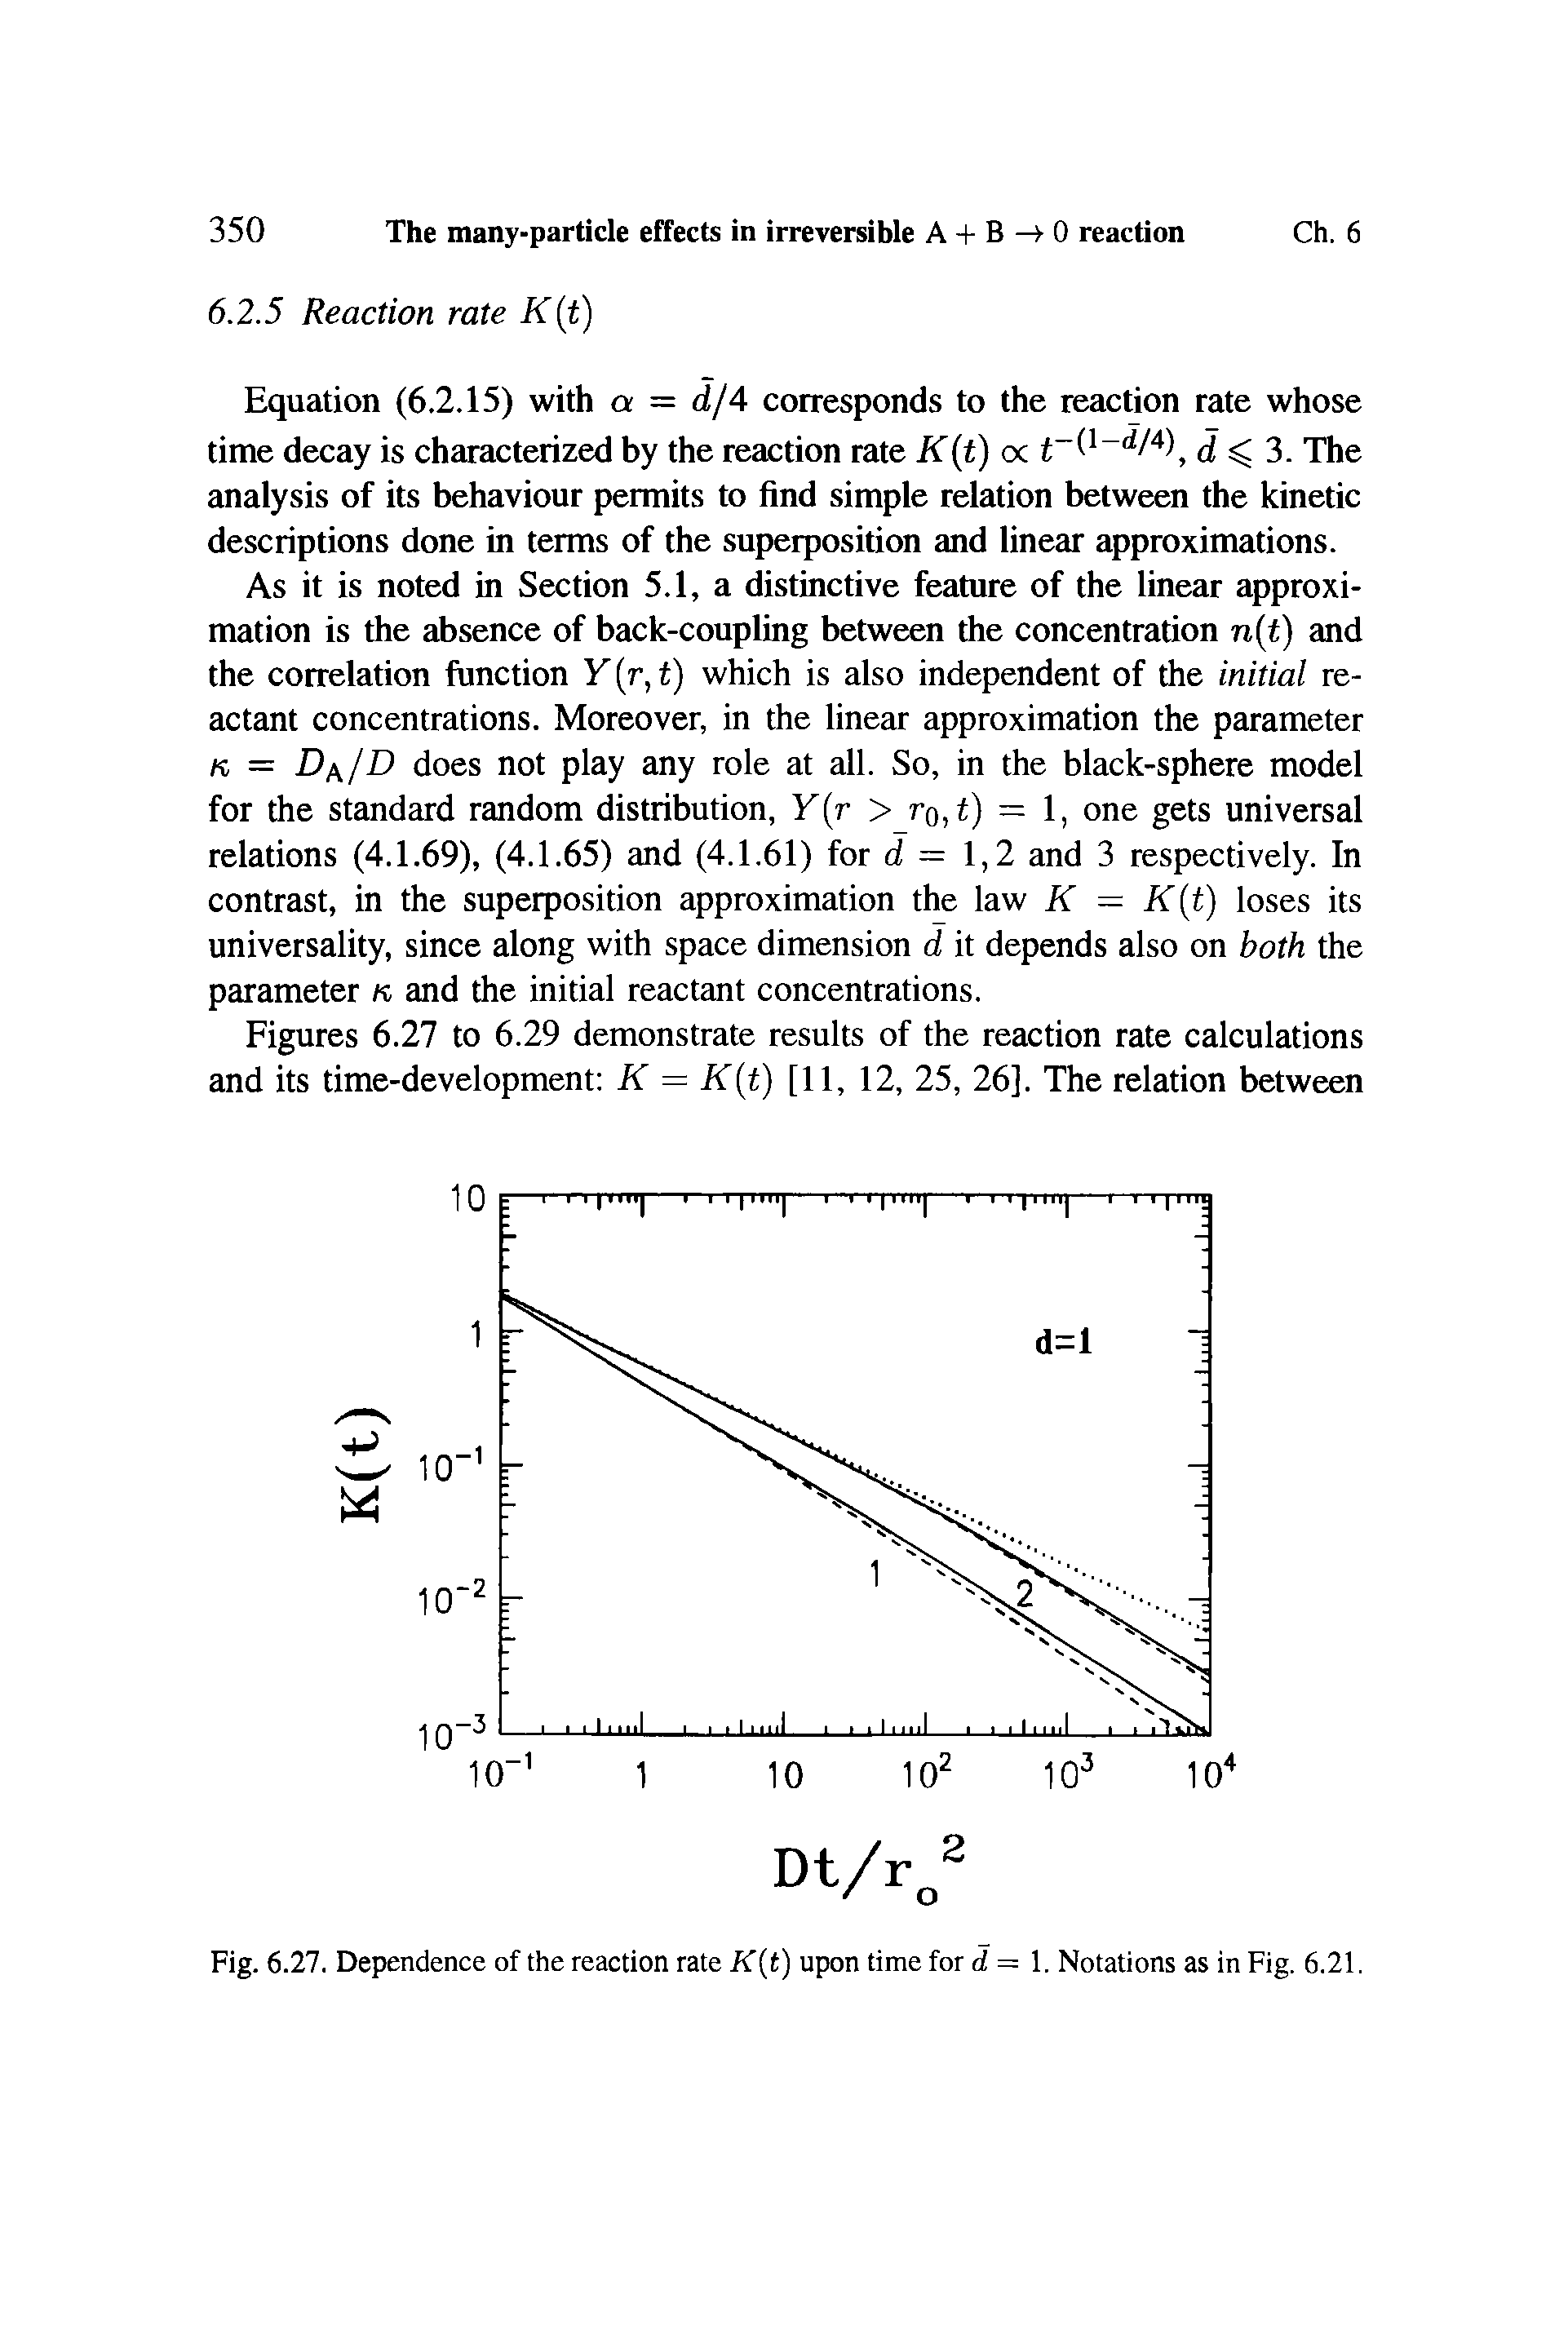 Figures 6.27 to 6.29 demonstrate results of the reaction rate calculations and its time-development K = K(t) [11, 12, 25, 26]. The relation between...